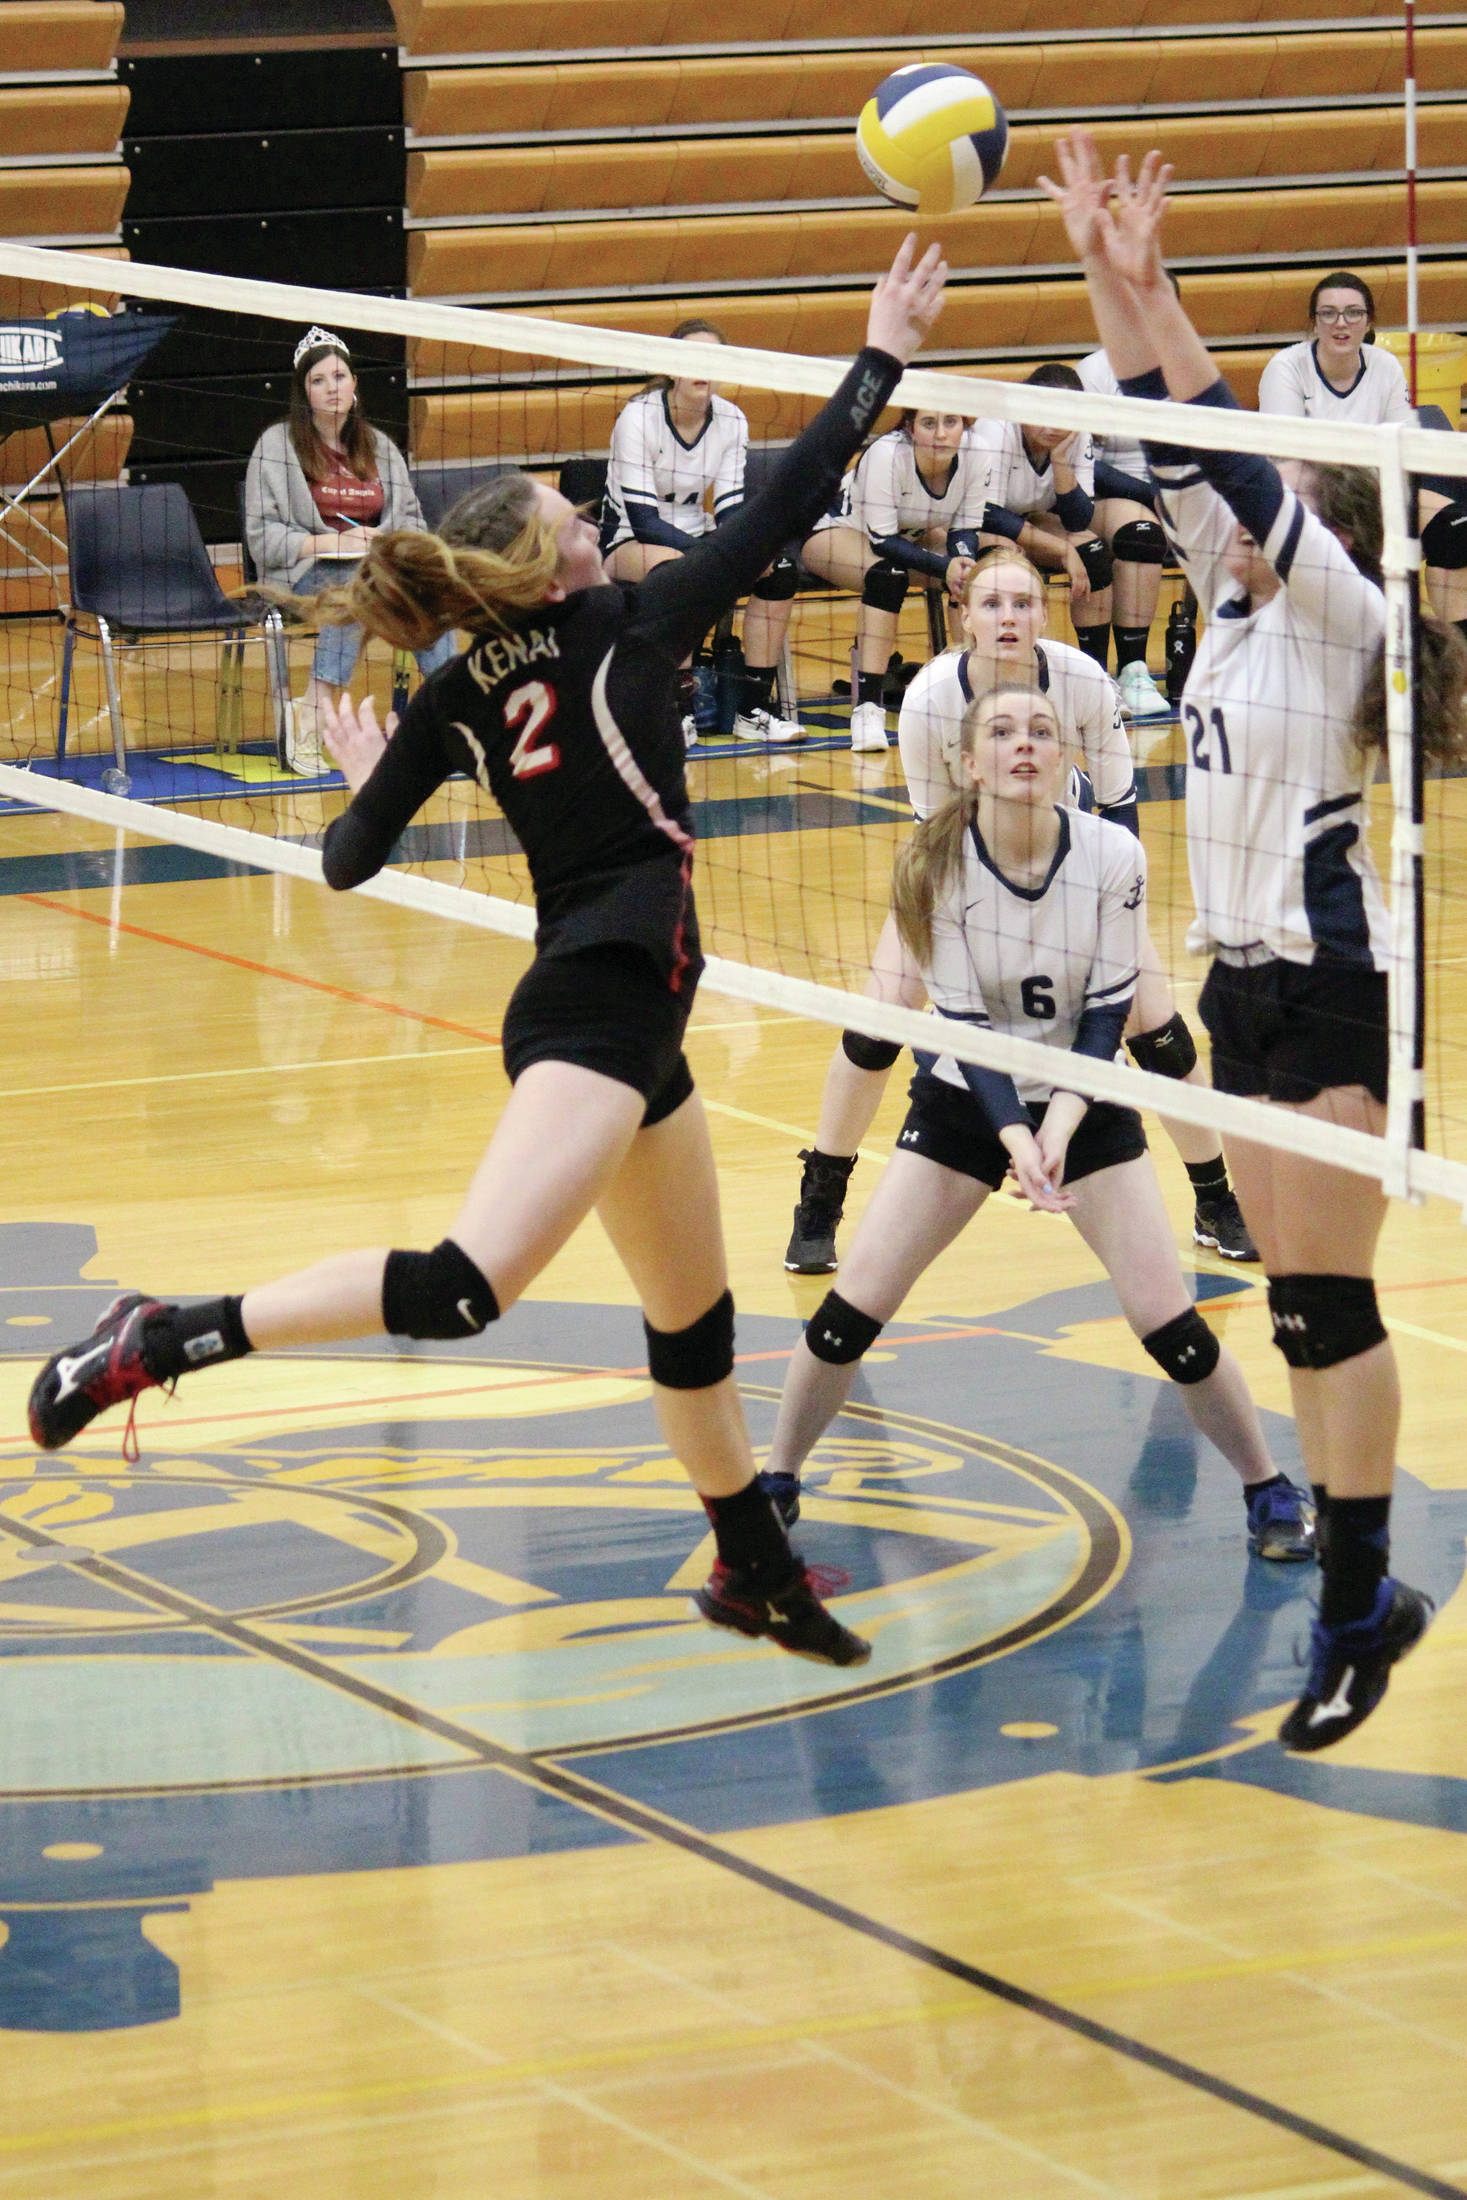 Kenai’s Bethany Morris tips the ball over the net while Homer’s Marina Carroll jumps to block during a Tuesday, Oct. 20, 2019 volleyball game between the two schools at the Alice Witte Gymnasium in Homer, Alaska. It was the last home game of the season for the Mariners. (Photo by Megan Pacer/Homer News)